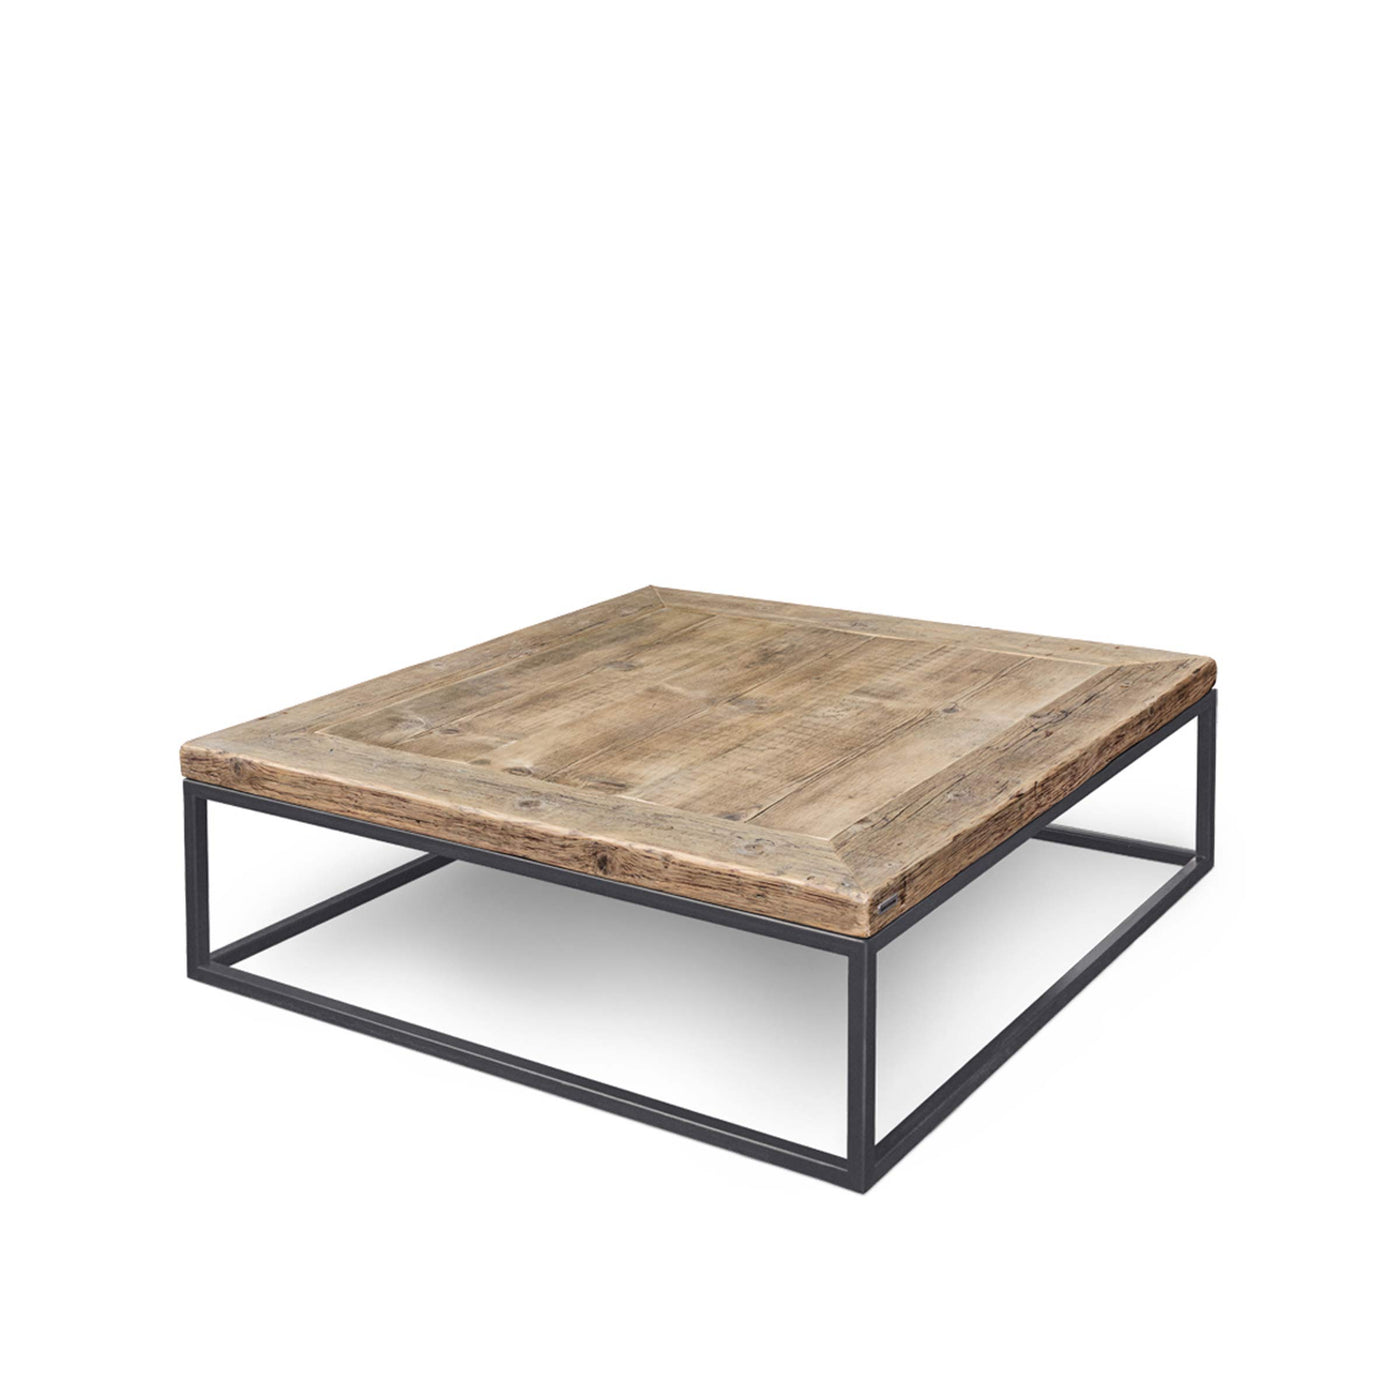 Wood Coffee Table ROMEO by Giuseppe Mazzardi for Inventoom 06